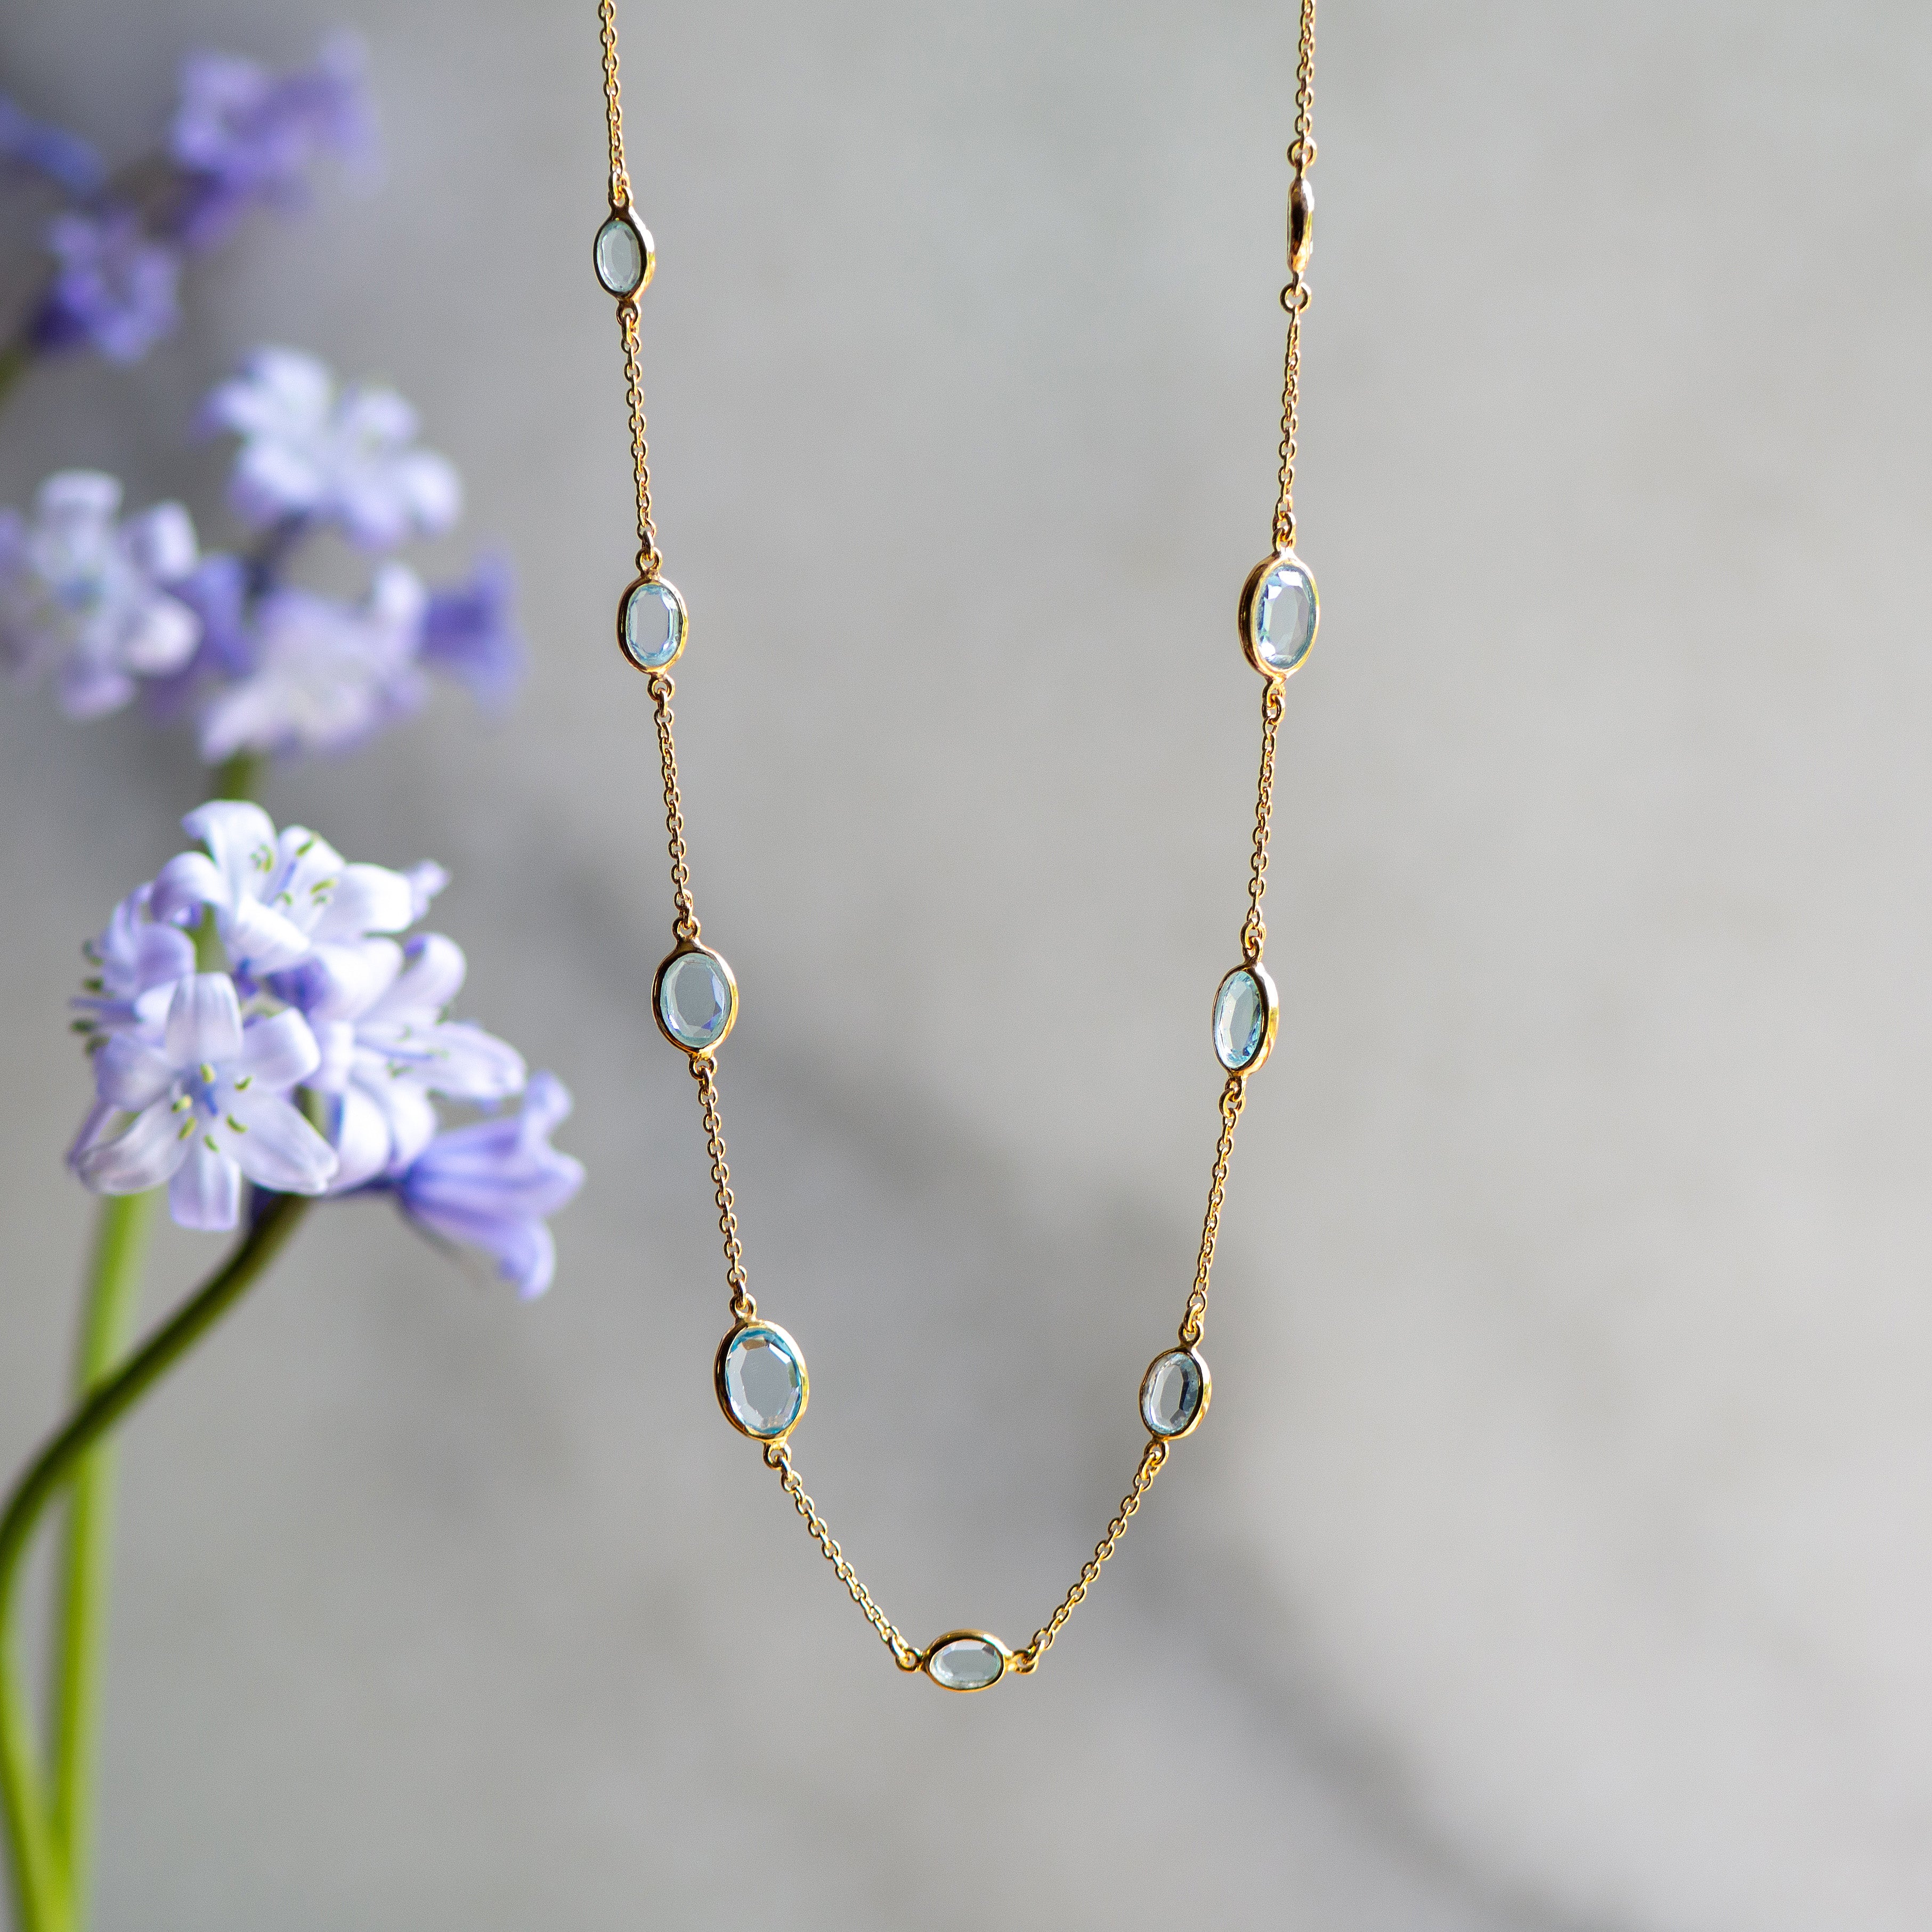 marilyn gold necklace with sky blue topaz from memara